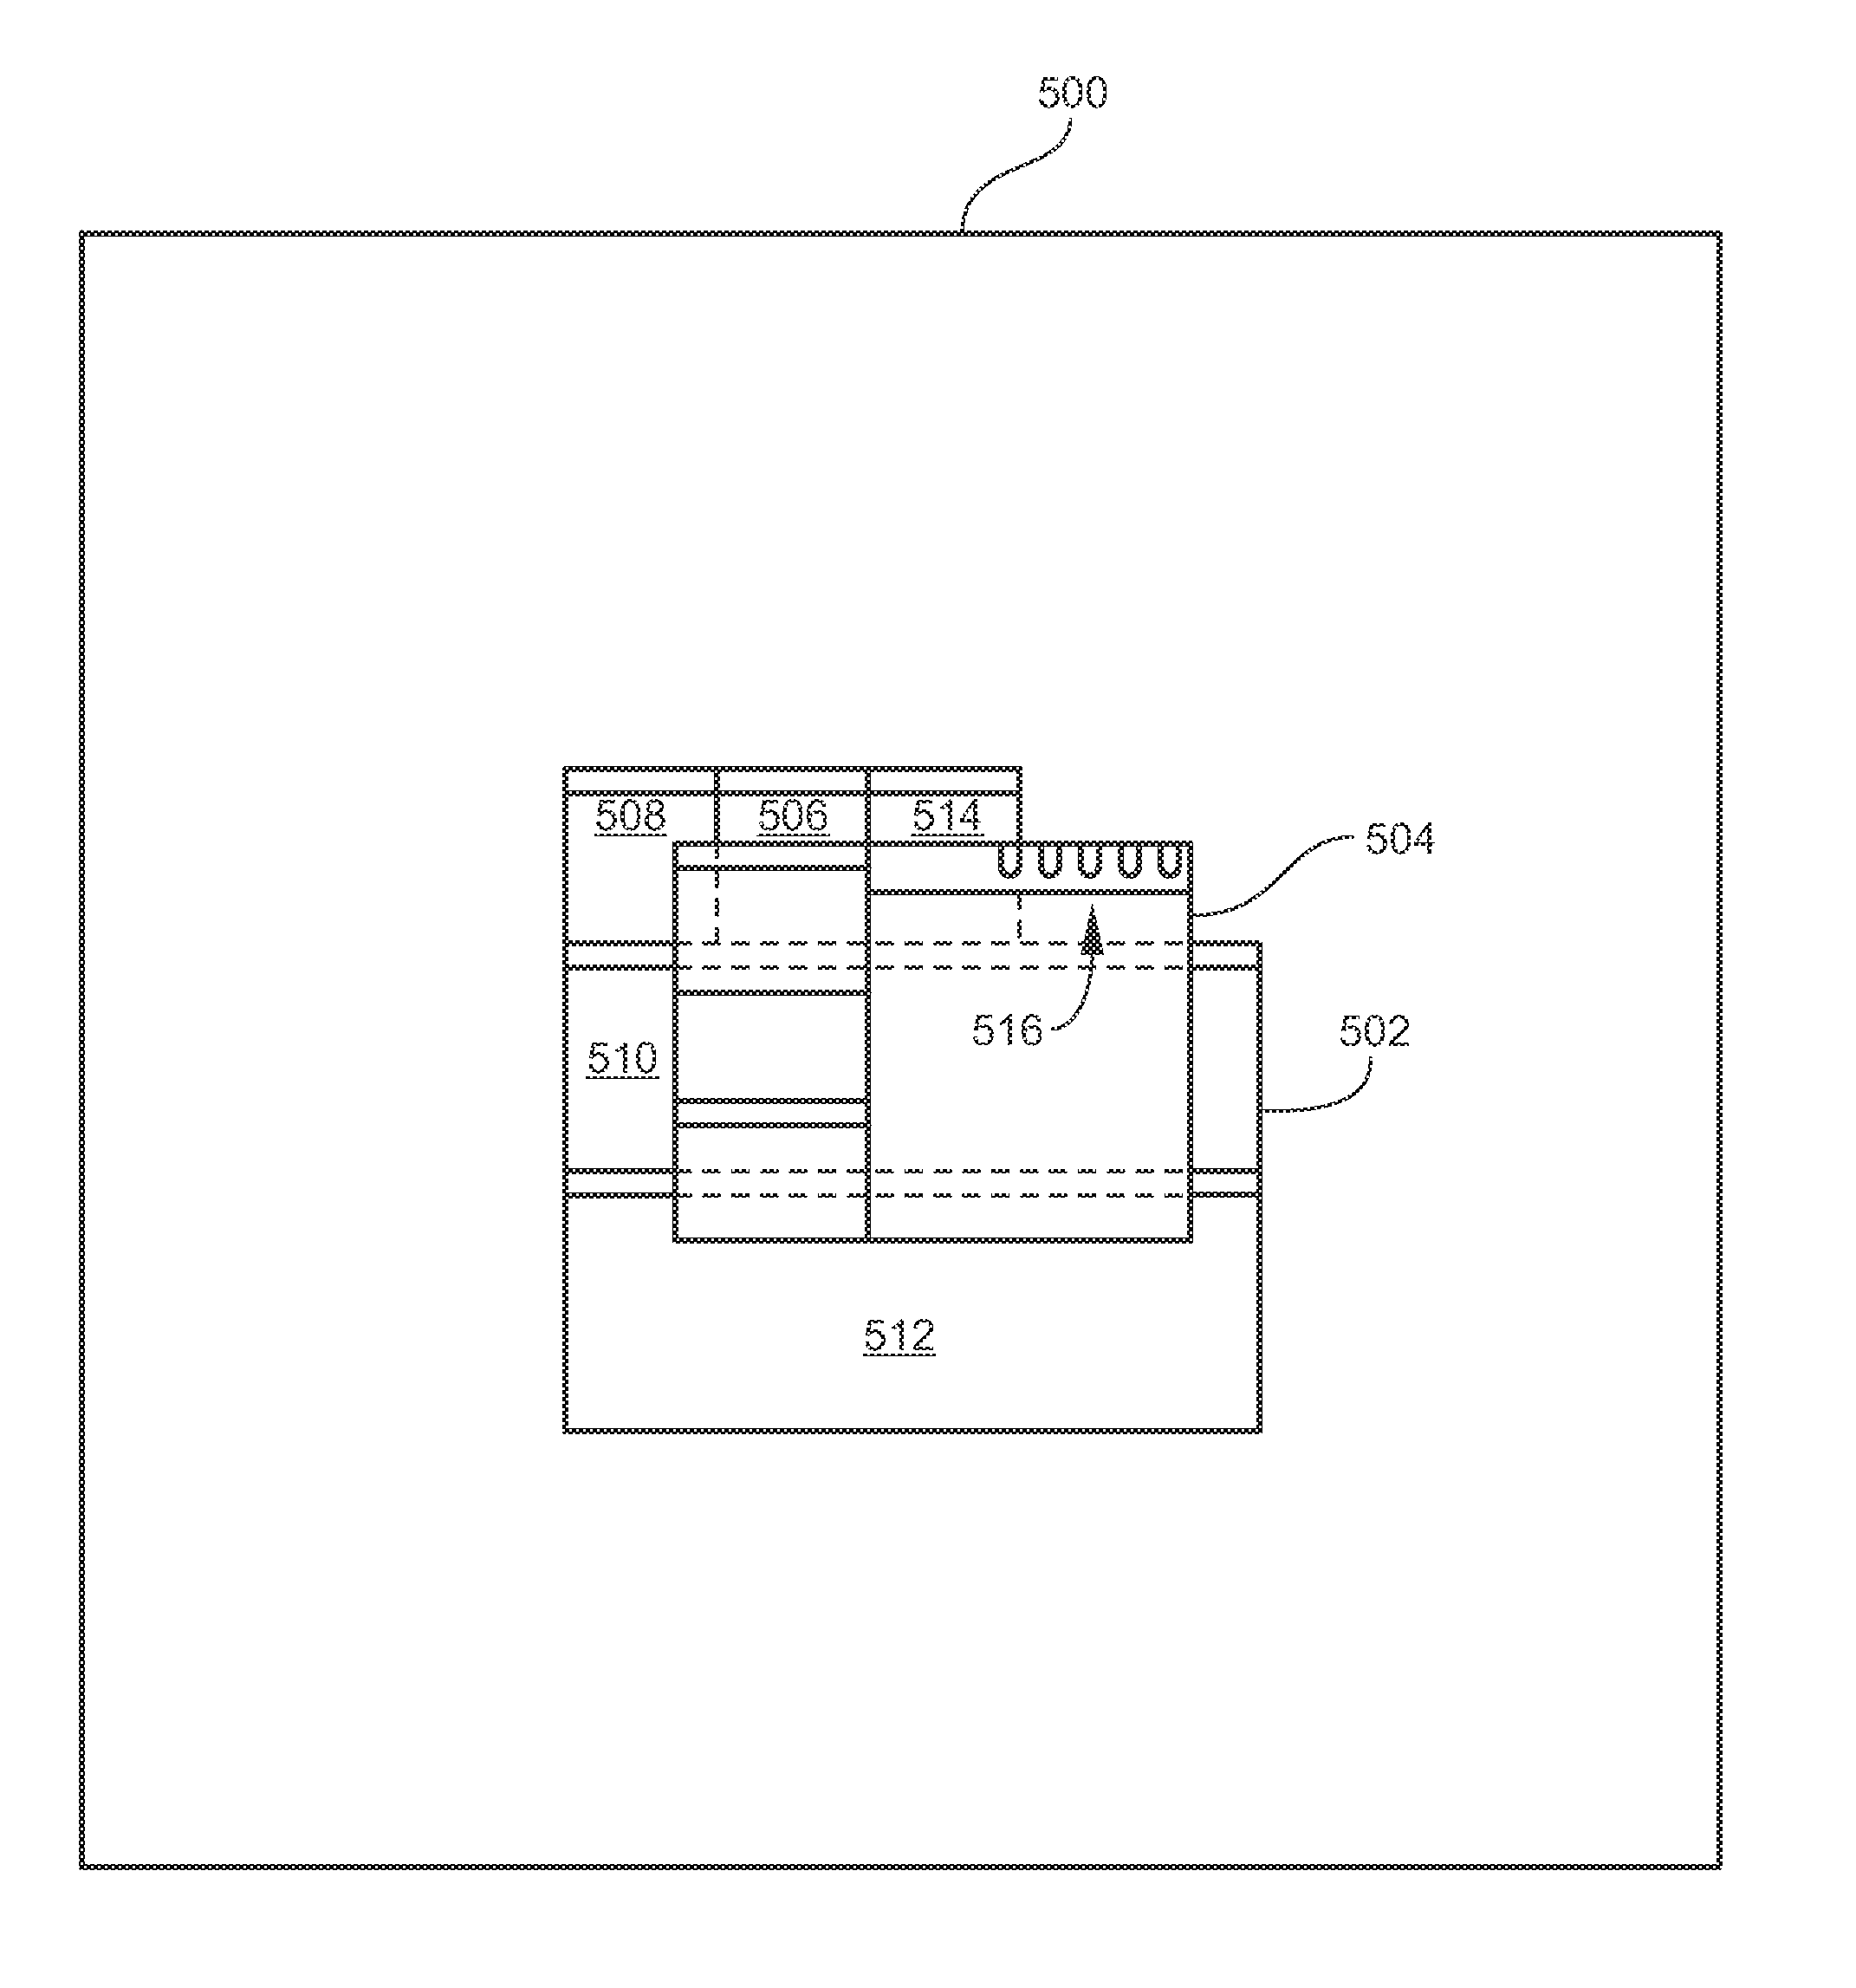 Methods and Systems for Managing a Graphical User Interface